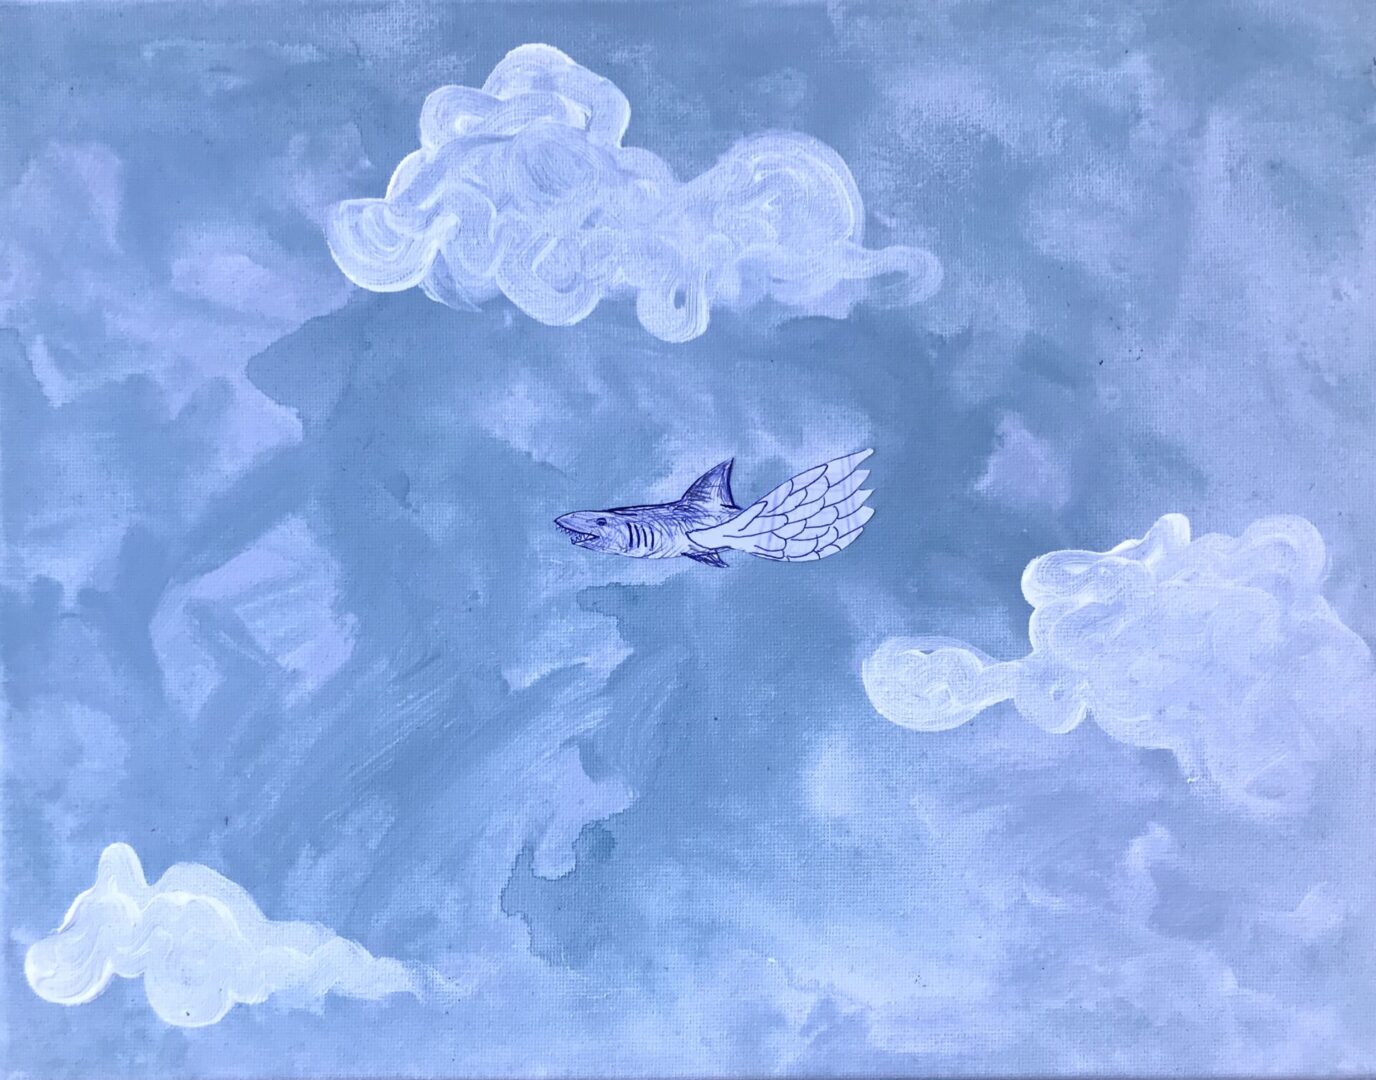 Oil painting of a shark fish with wings